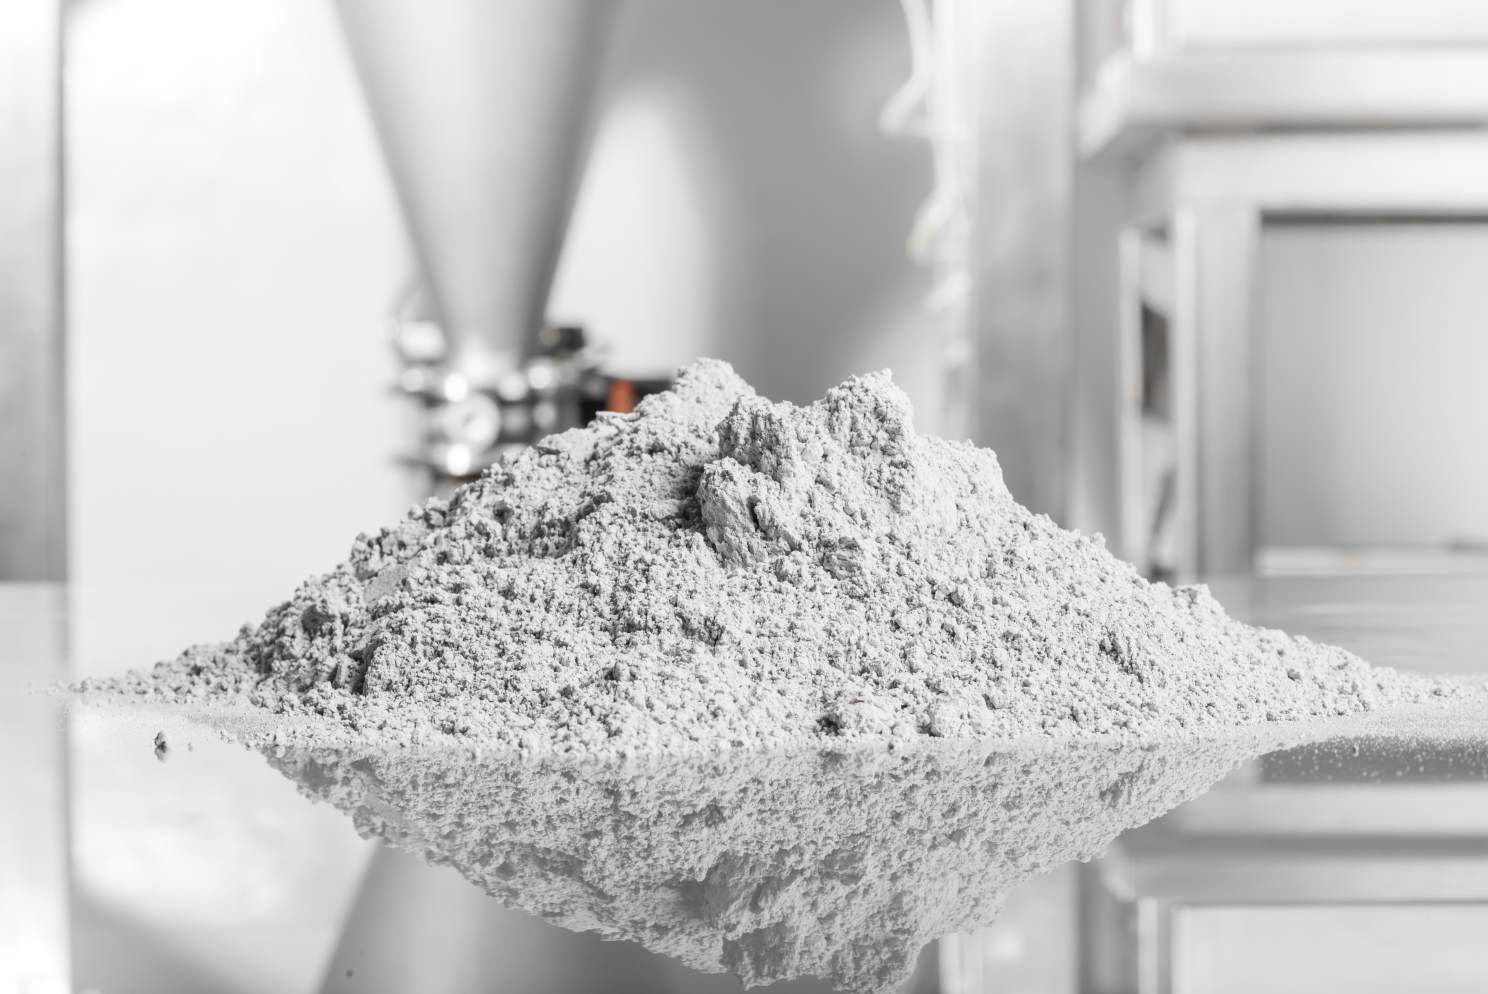 The PEEK powders are comprised of particles with average particle sizes ranging from 5 to 110 µm.